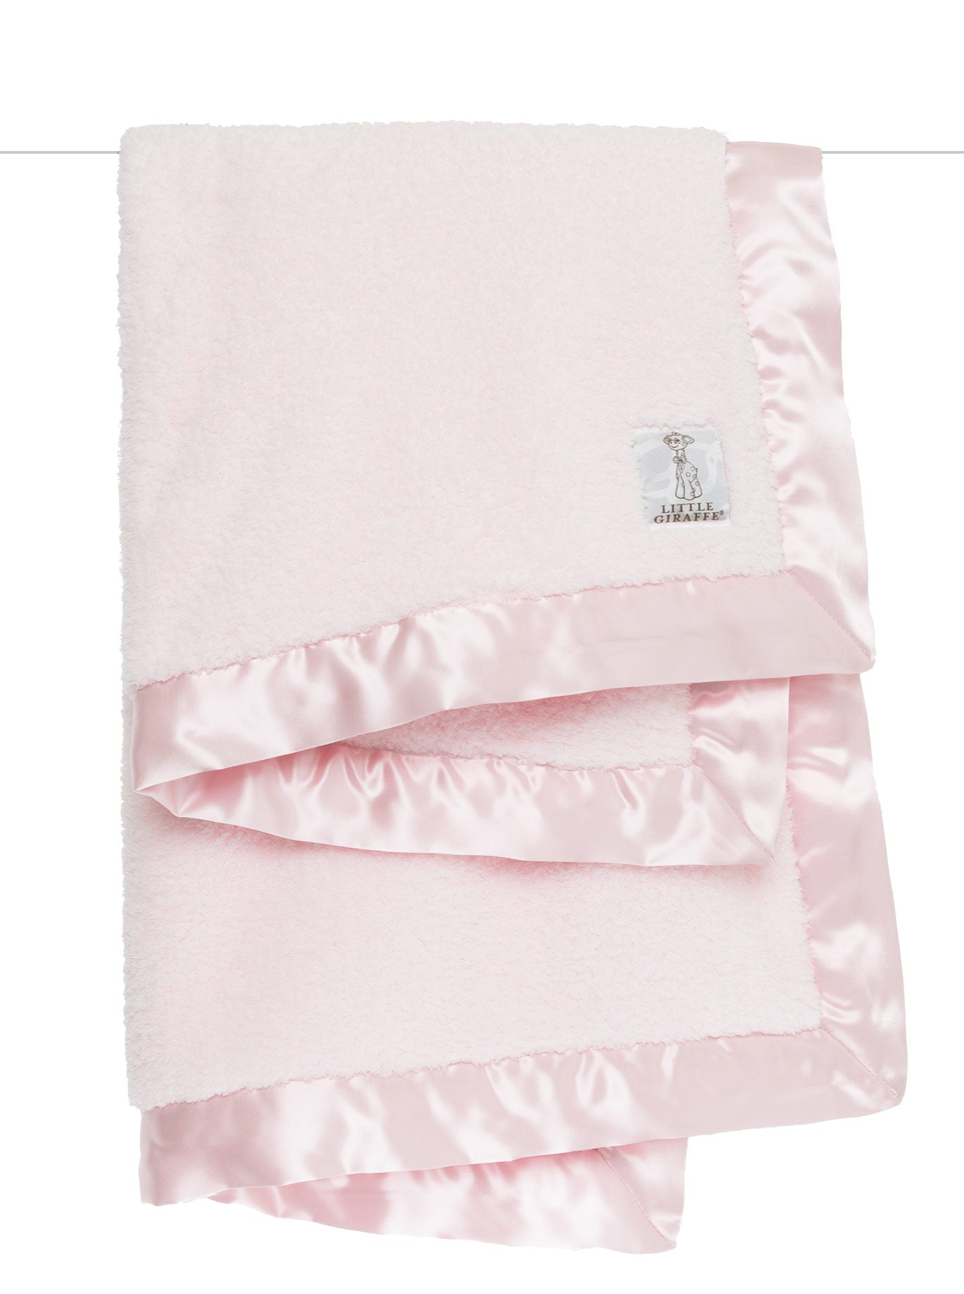 Chinelle Baby Blanket, Color: Pink